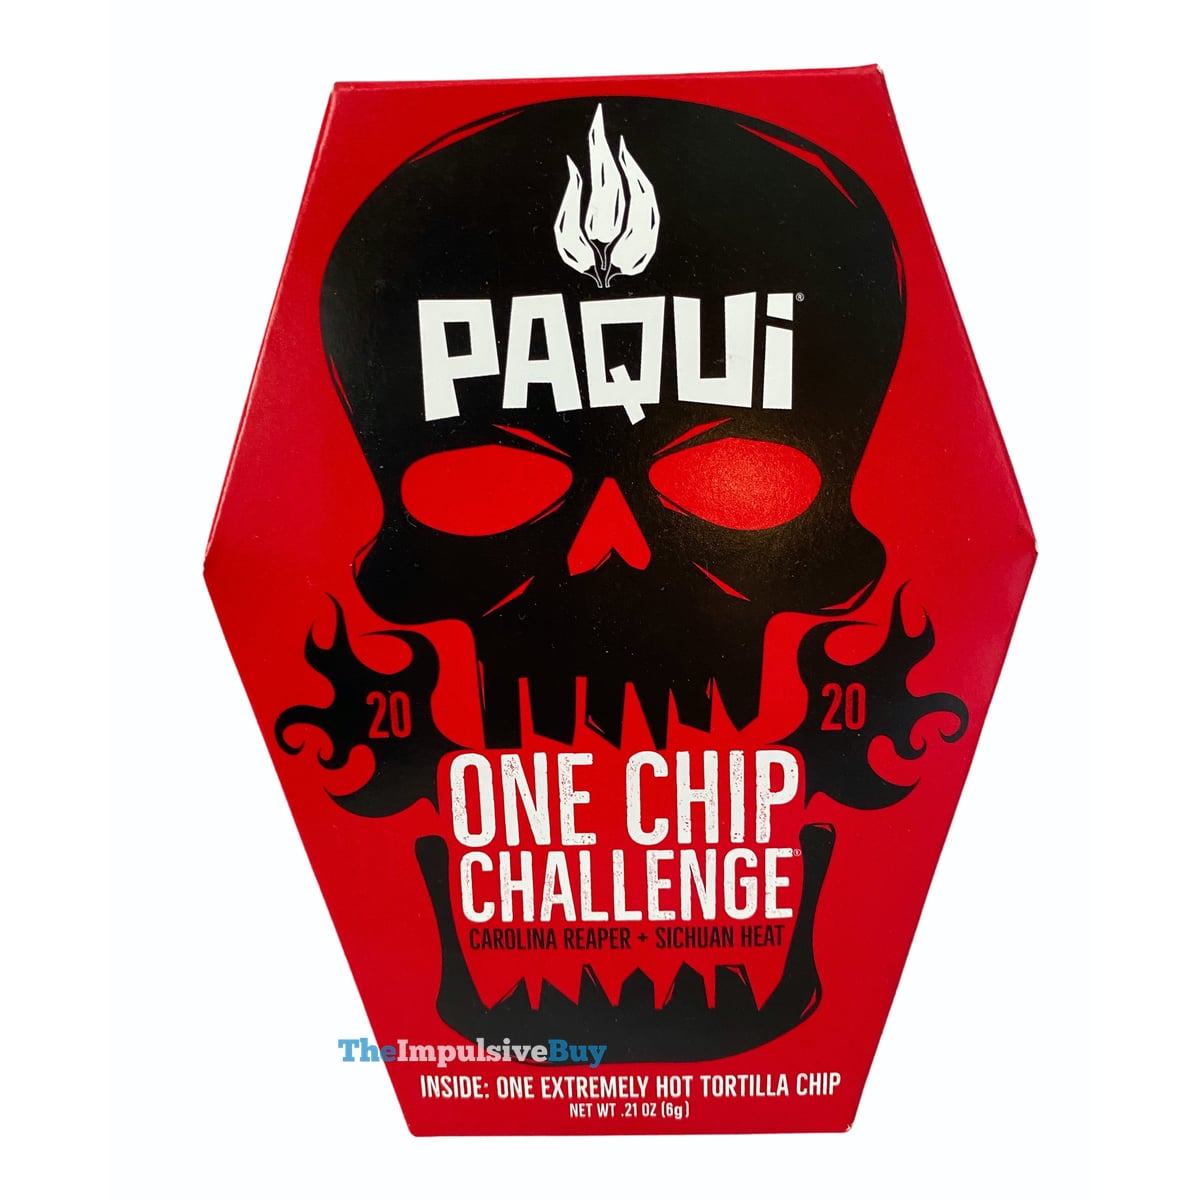 Teenager's Death Has Paqui Spicy 'One Chip Challenge' Under Scrutiny - The  New York Times